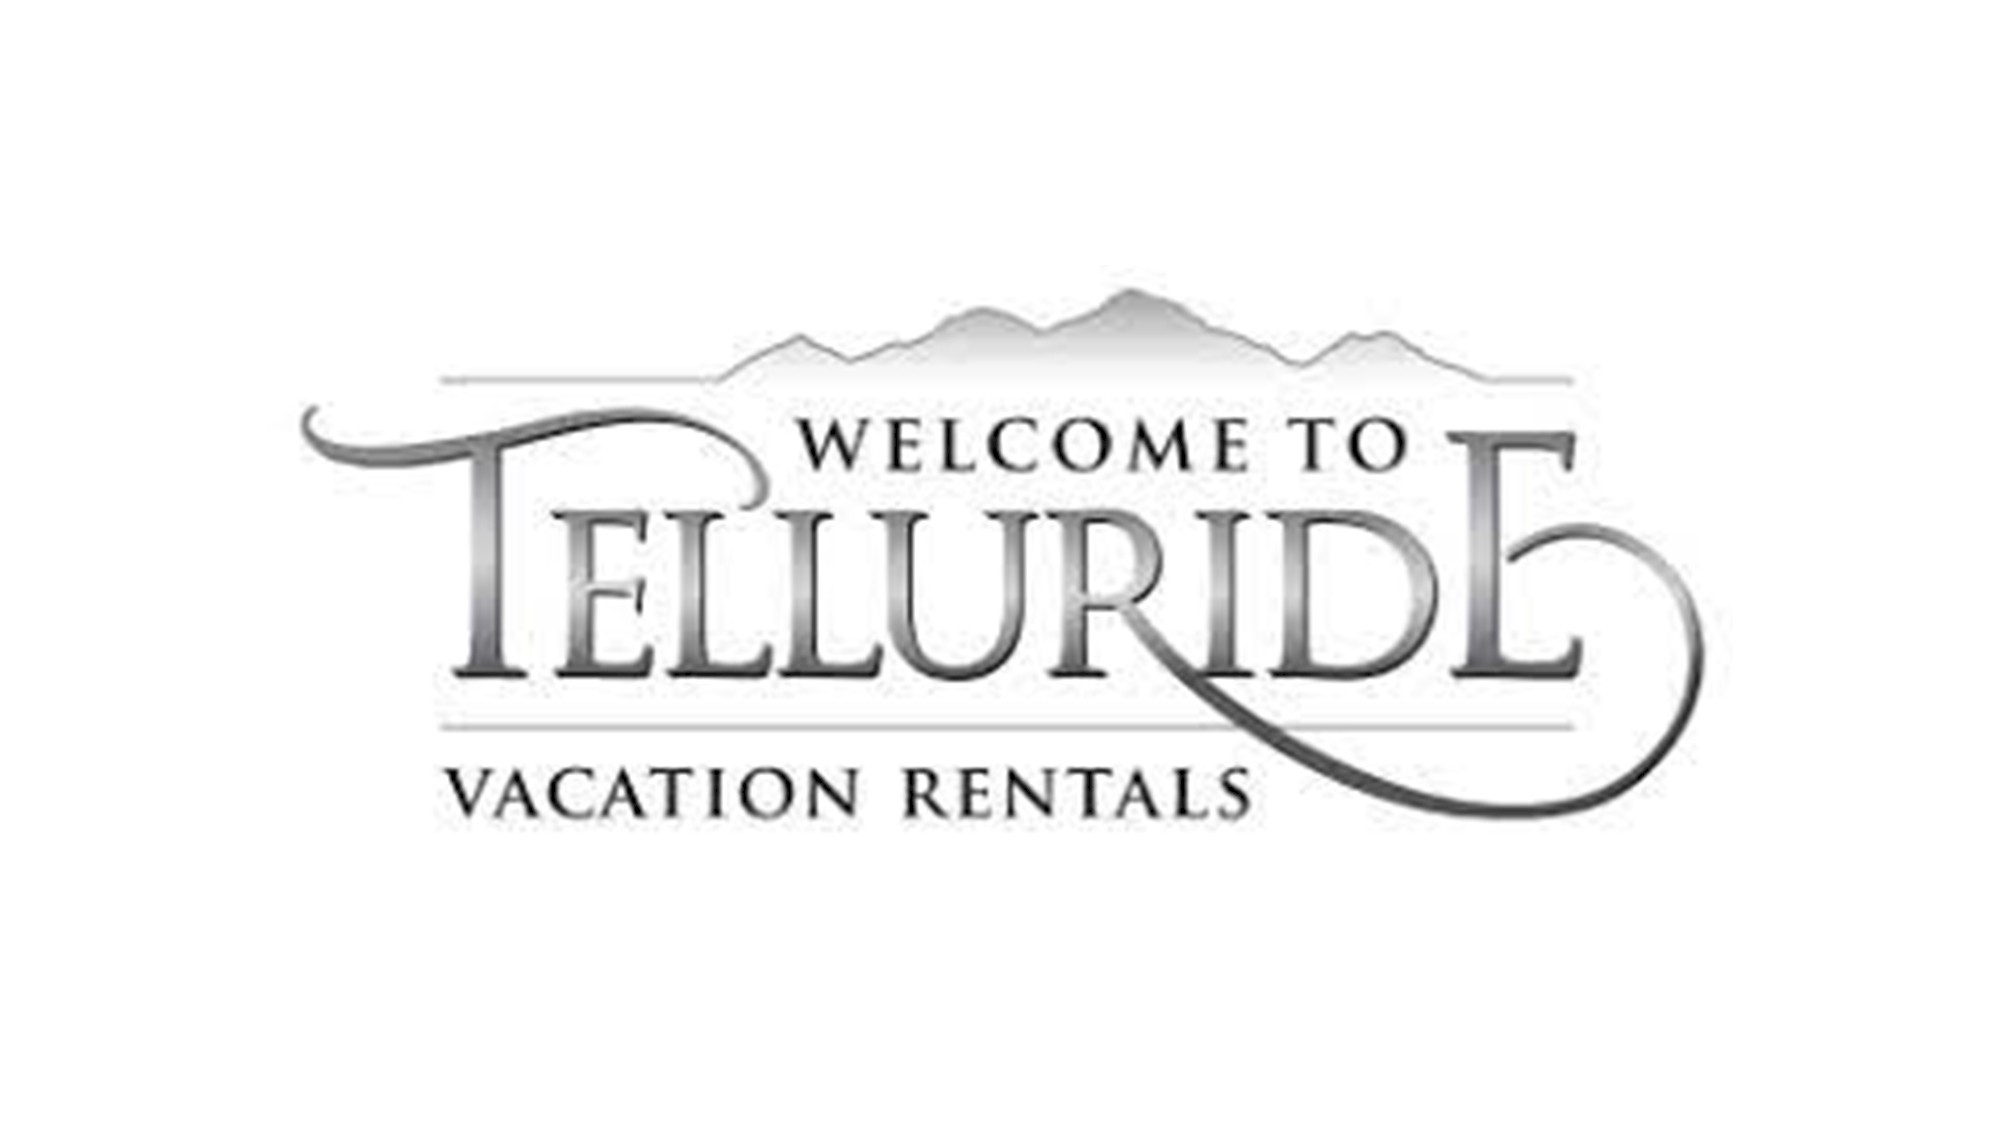 Welcome To Telluride Vacation Rentals